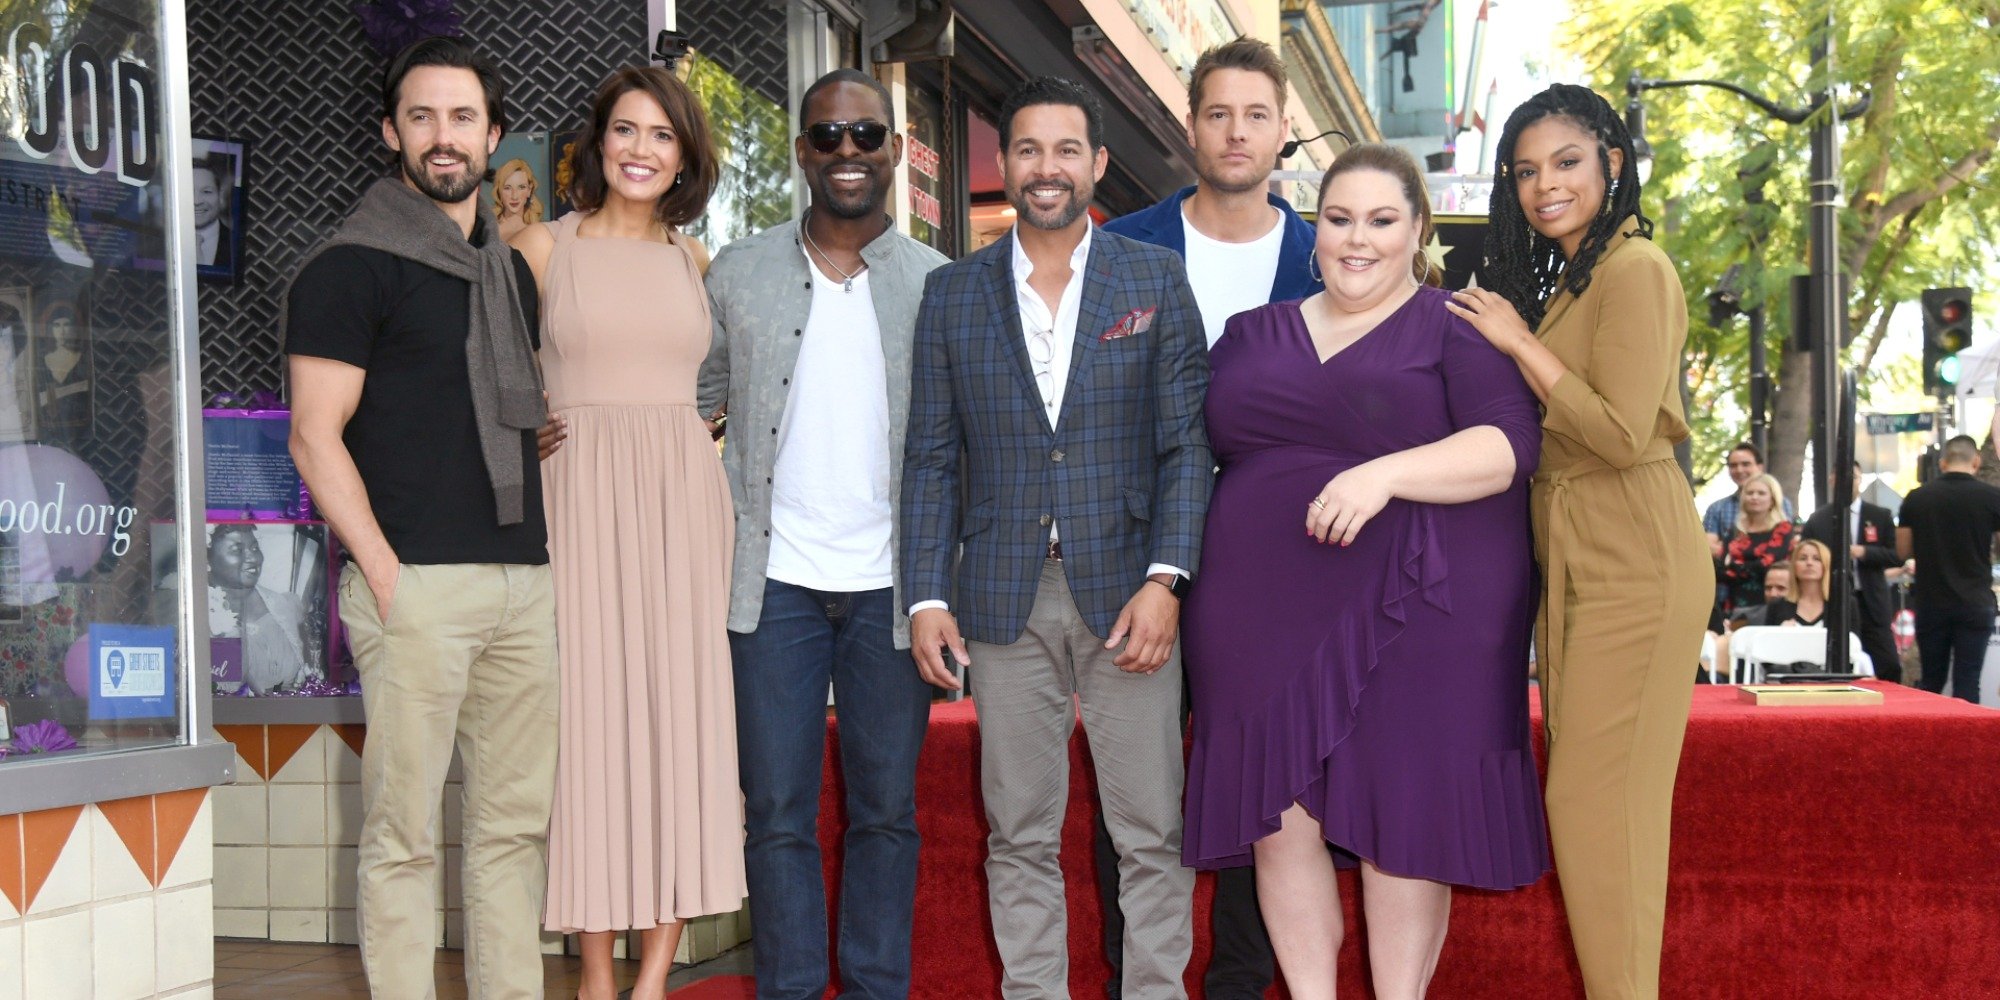 The cast of 'This Is Us' Sterling K Brown, Susan Kelechi Watson, Milo Ventimiglia, Mandy Moore, Justin Hartley, Chrissy Metz, and Jon Huertas.